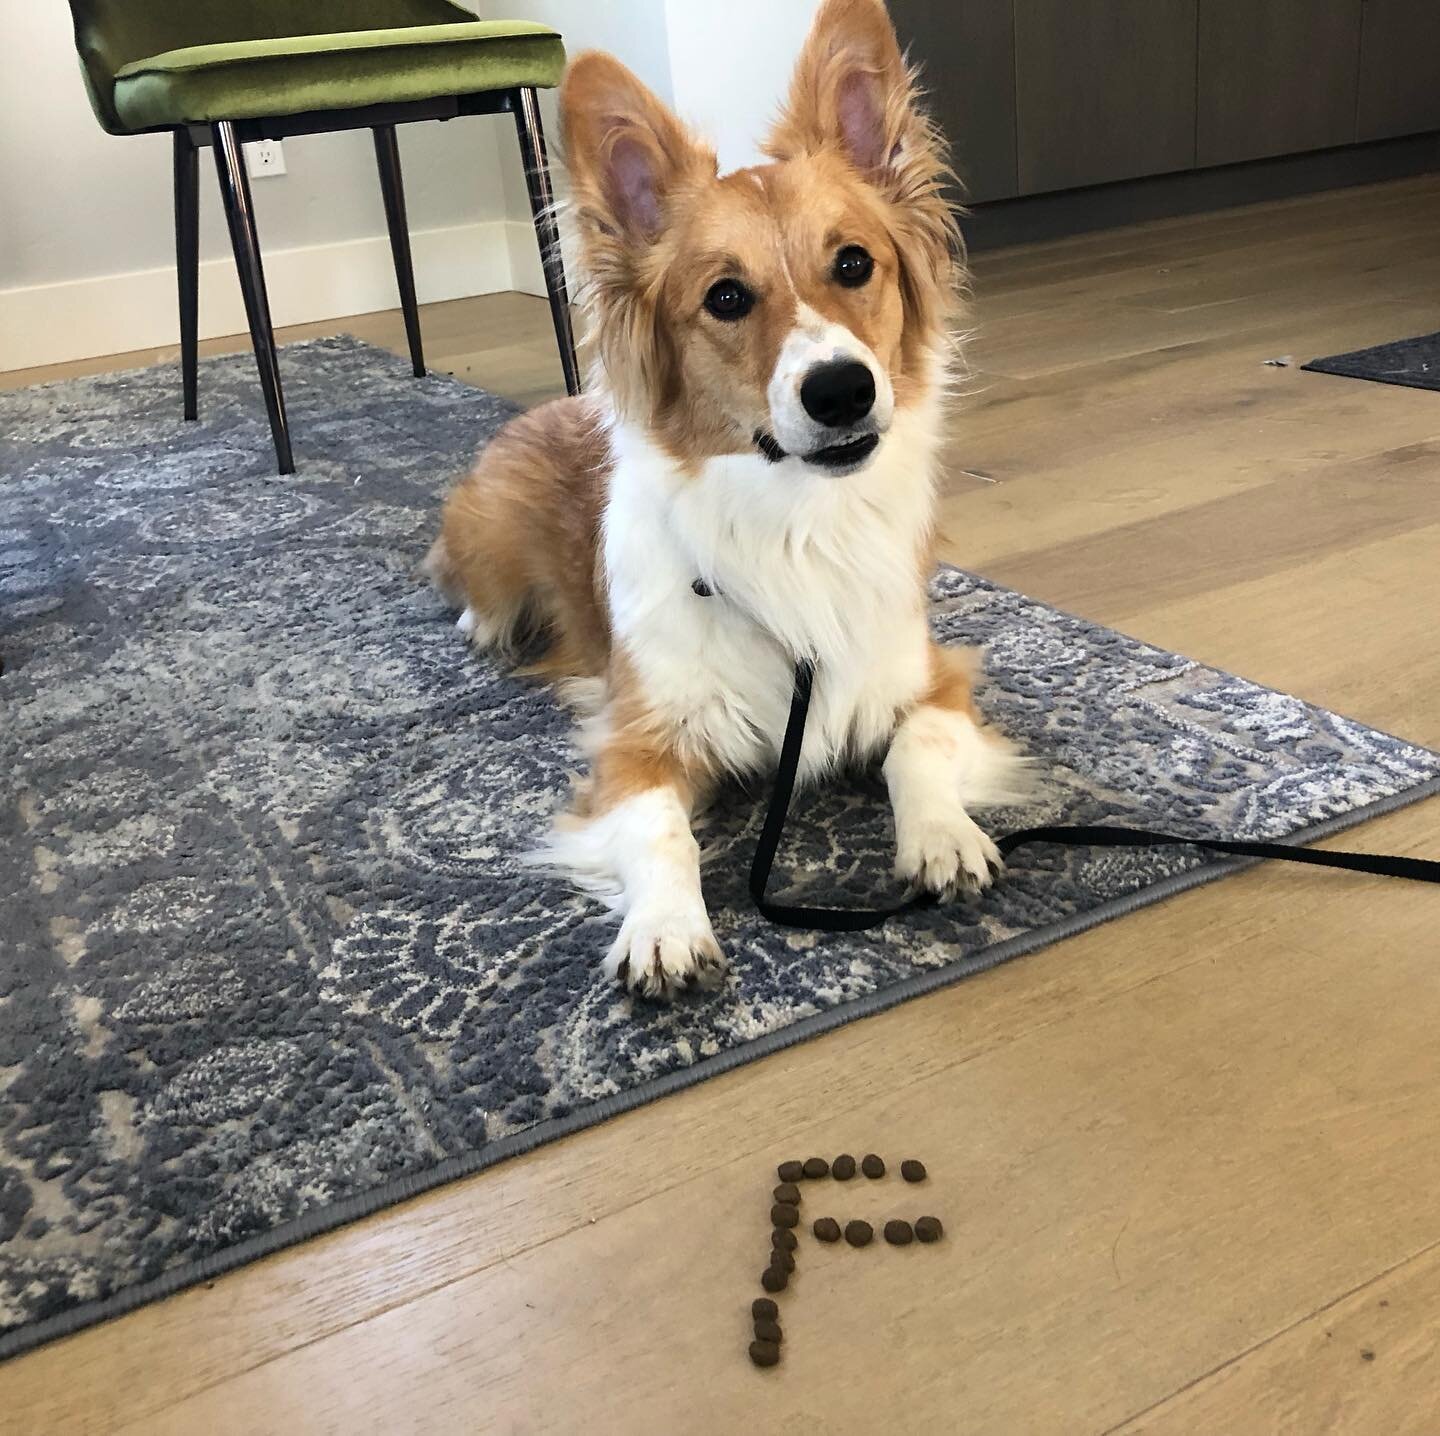 Our very first Dog of the Week is the exceptionally cute Freddie Mercury! Freddie is a young corgi x border collie that has been mastering skills like extended down stays, bed, loose leash walking, and recall in our Day Training program. ⁣
⁣
Nickname